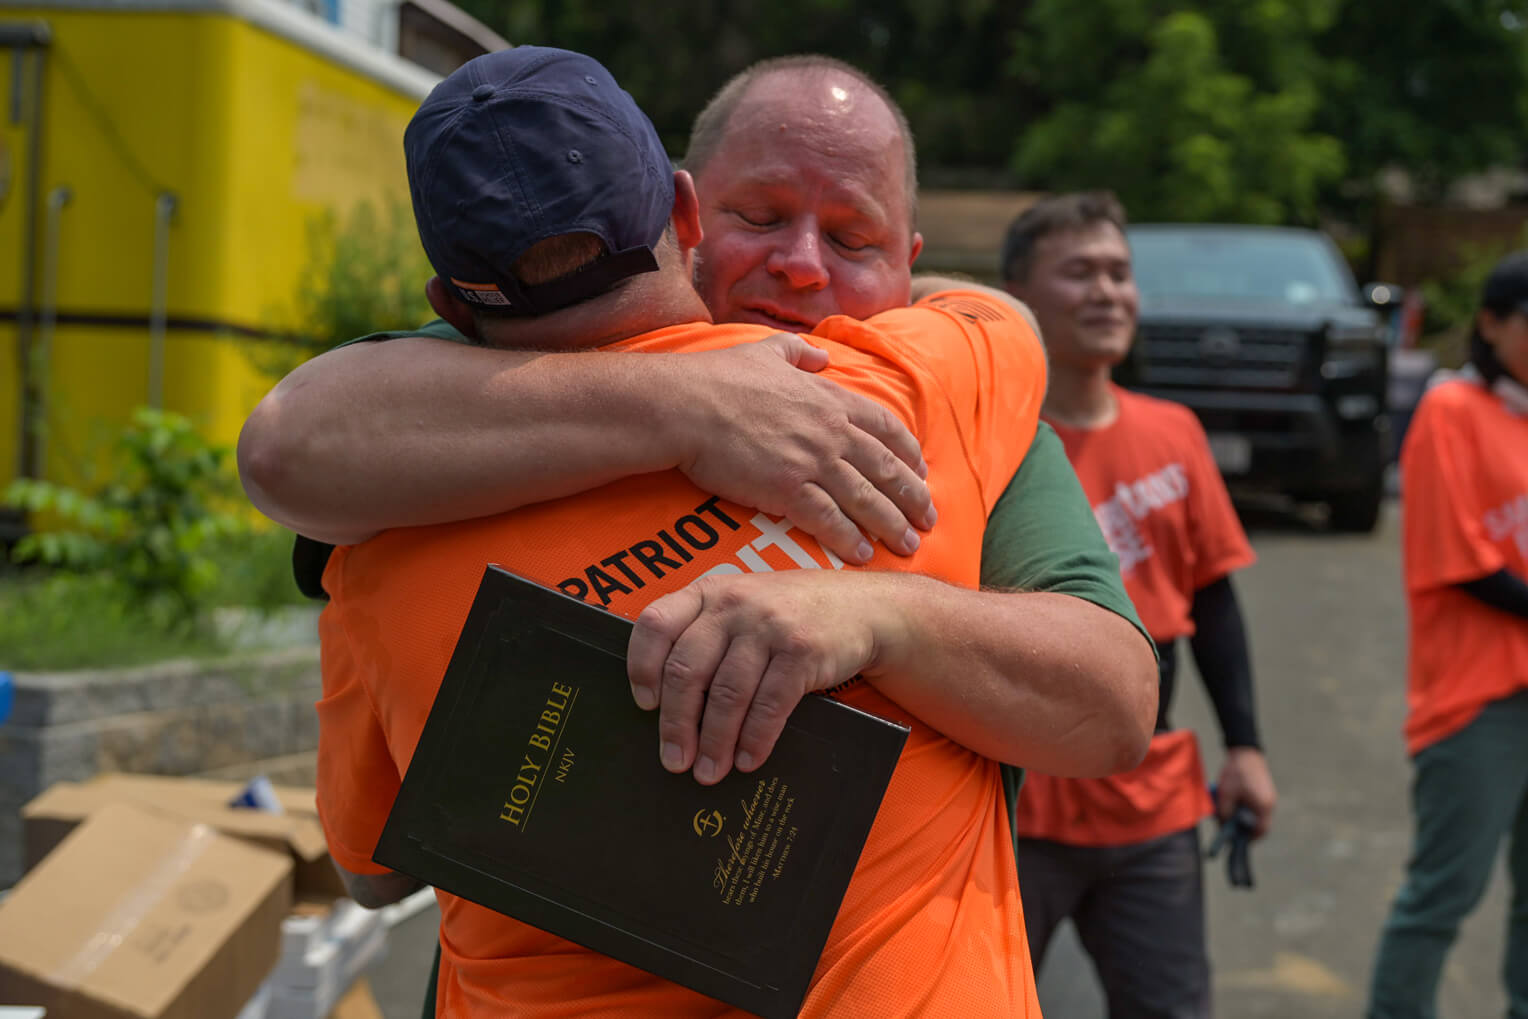 Homeowner Joe Bartel received a special Billy Graham Study Bible with signatures from each volunteer. He was overcome with gratitude for the work on his home.